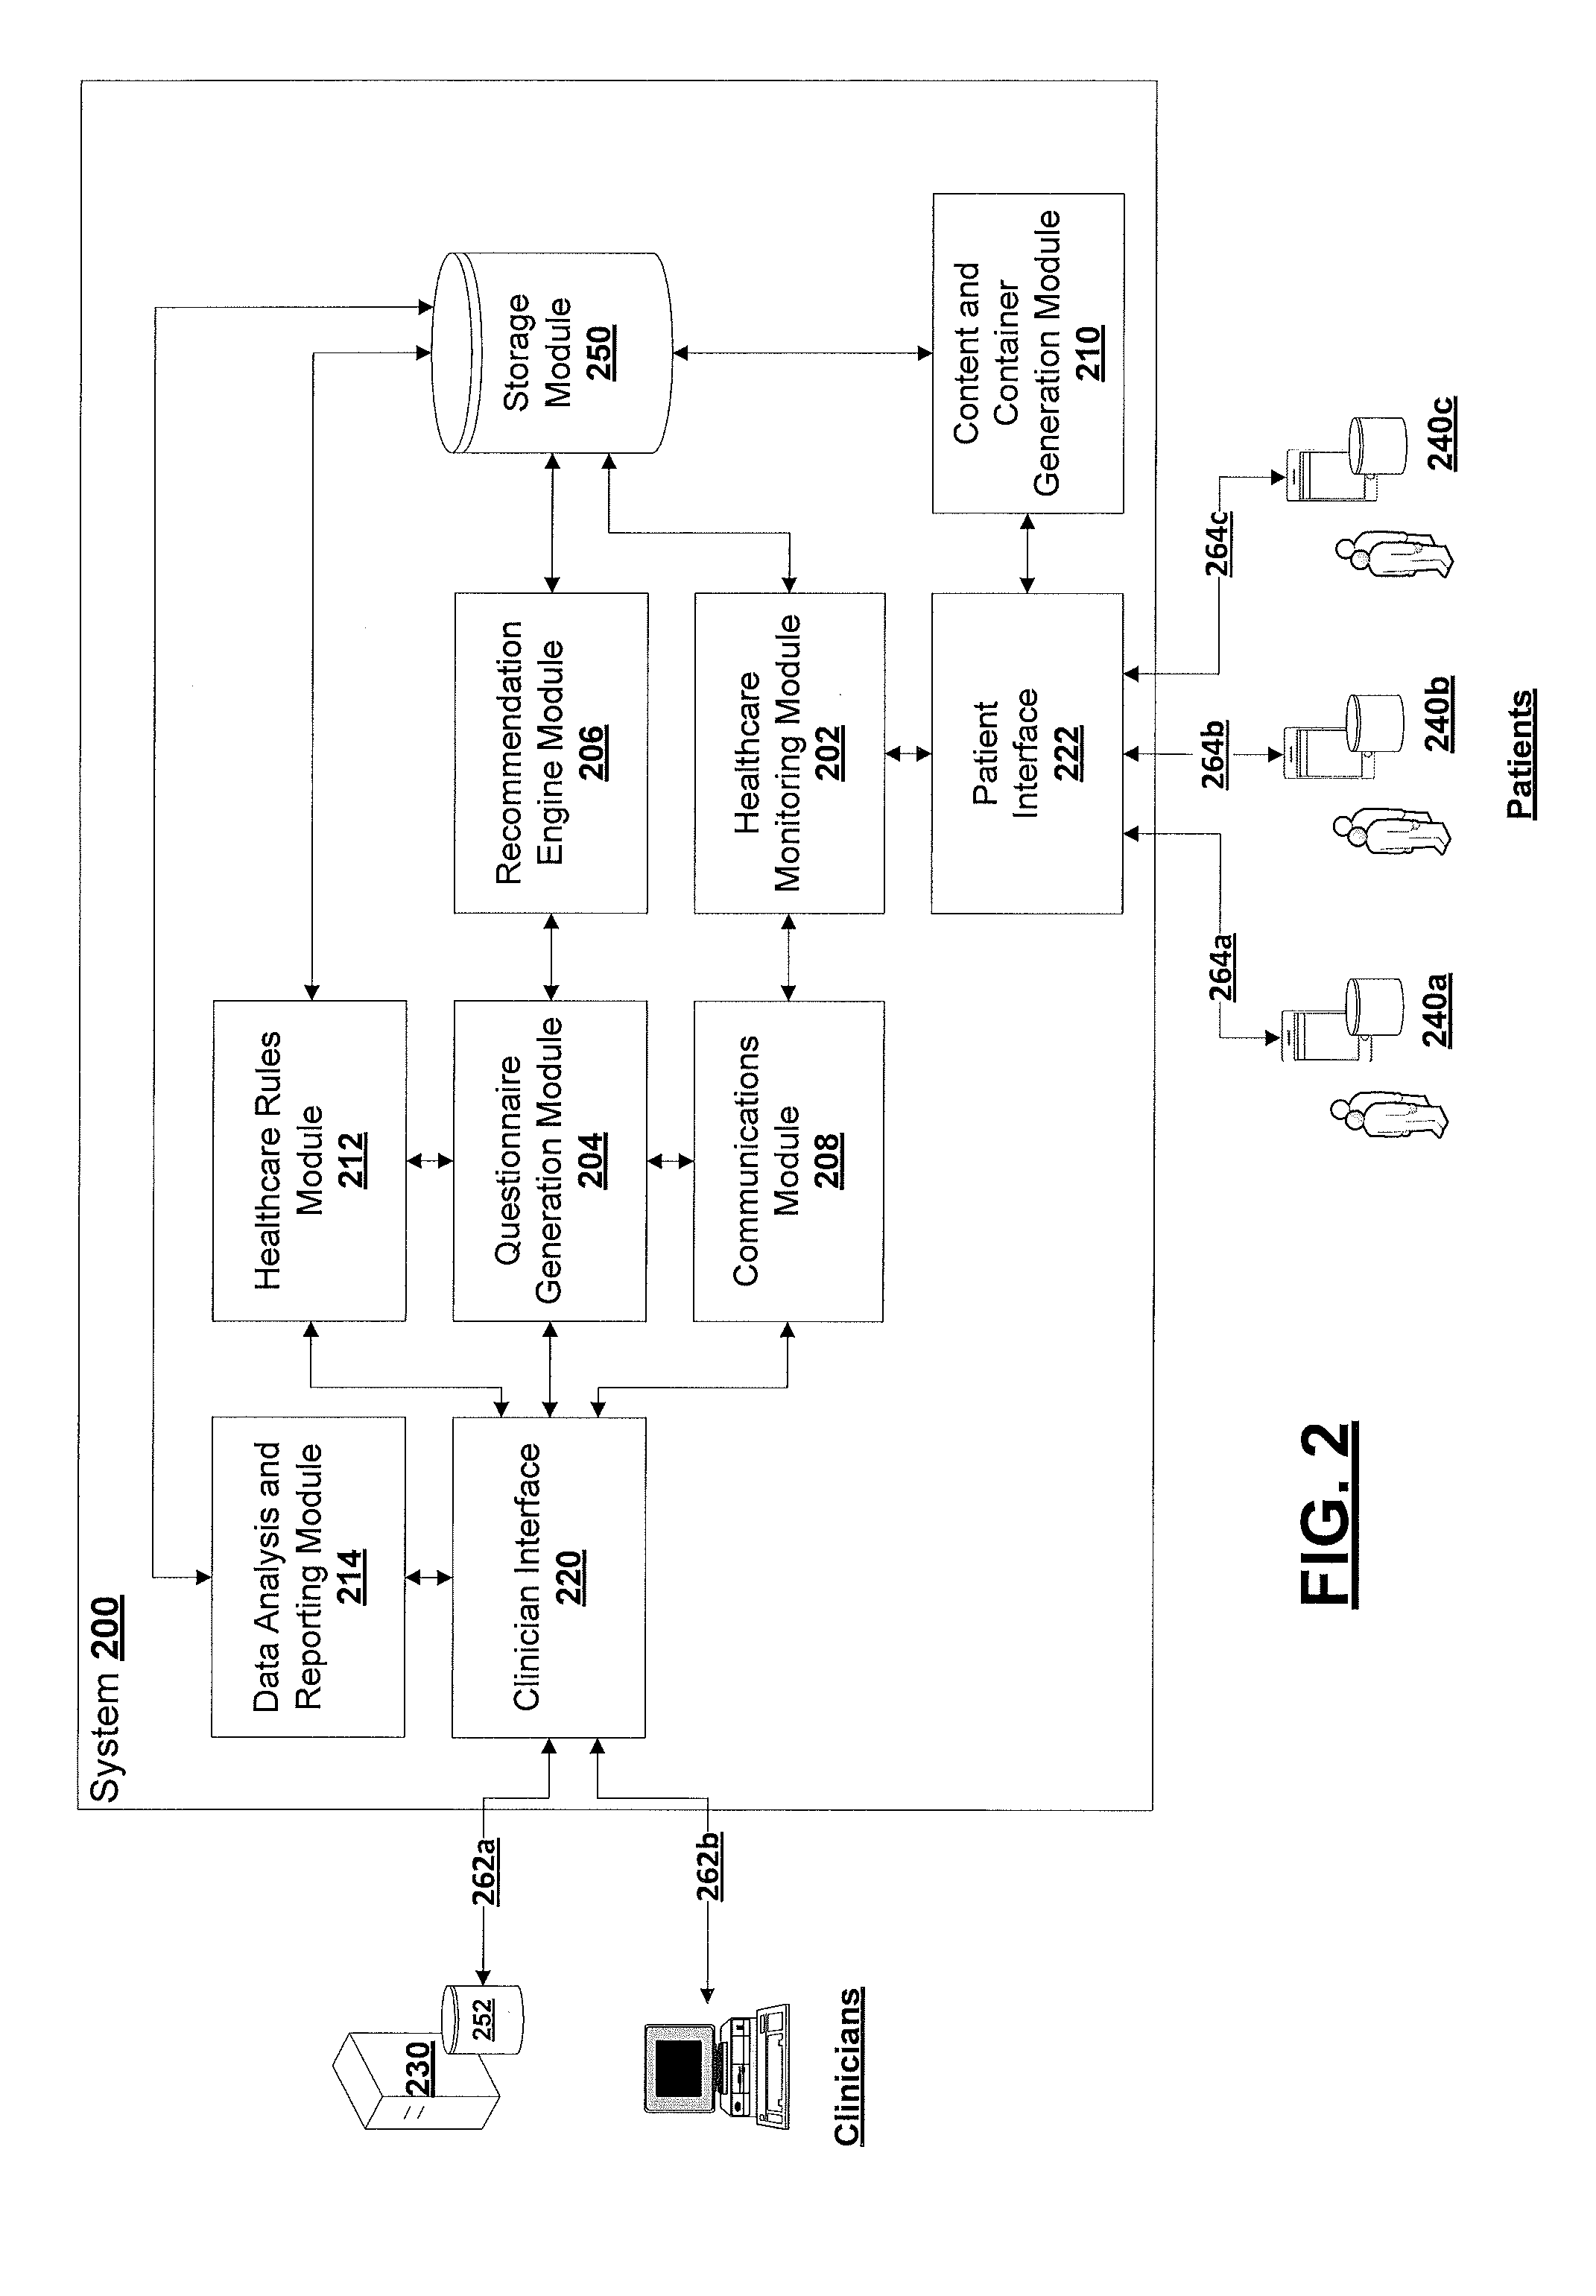 System and method for managing healthcare